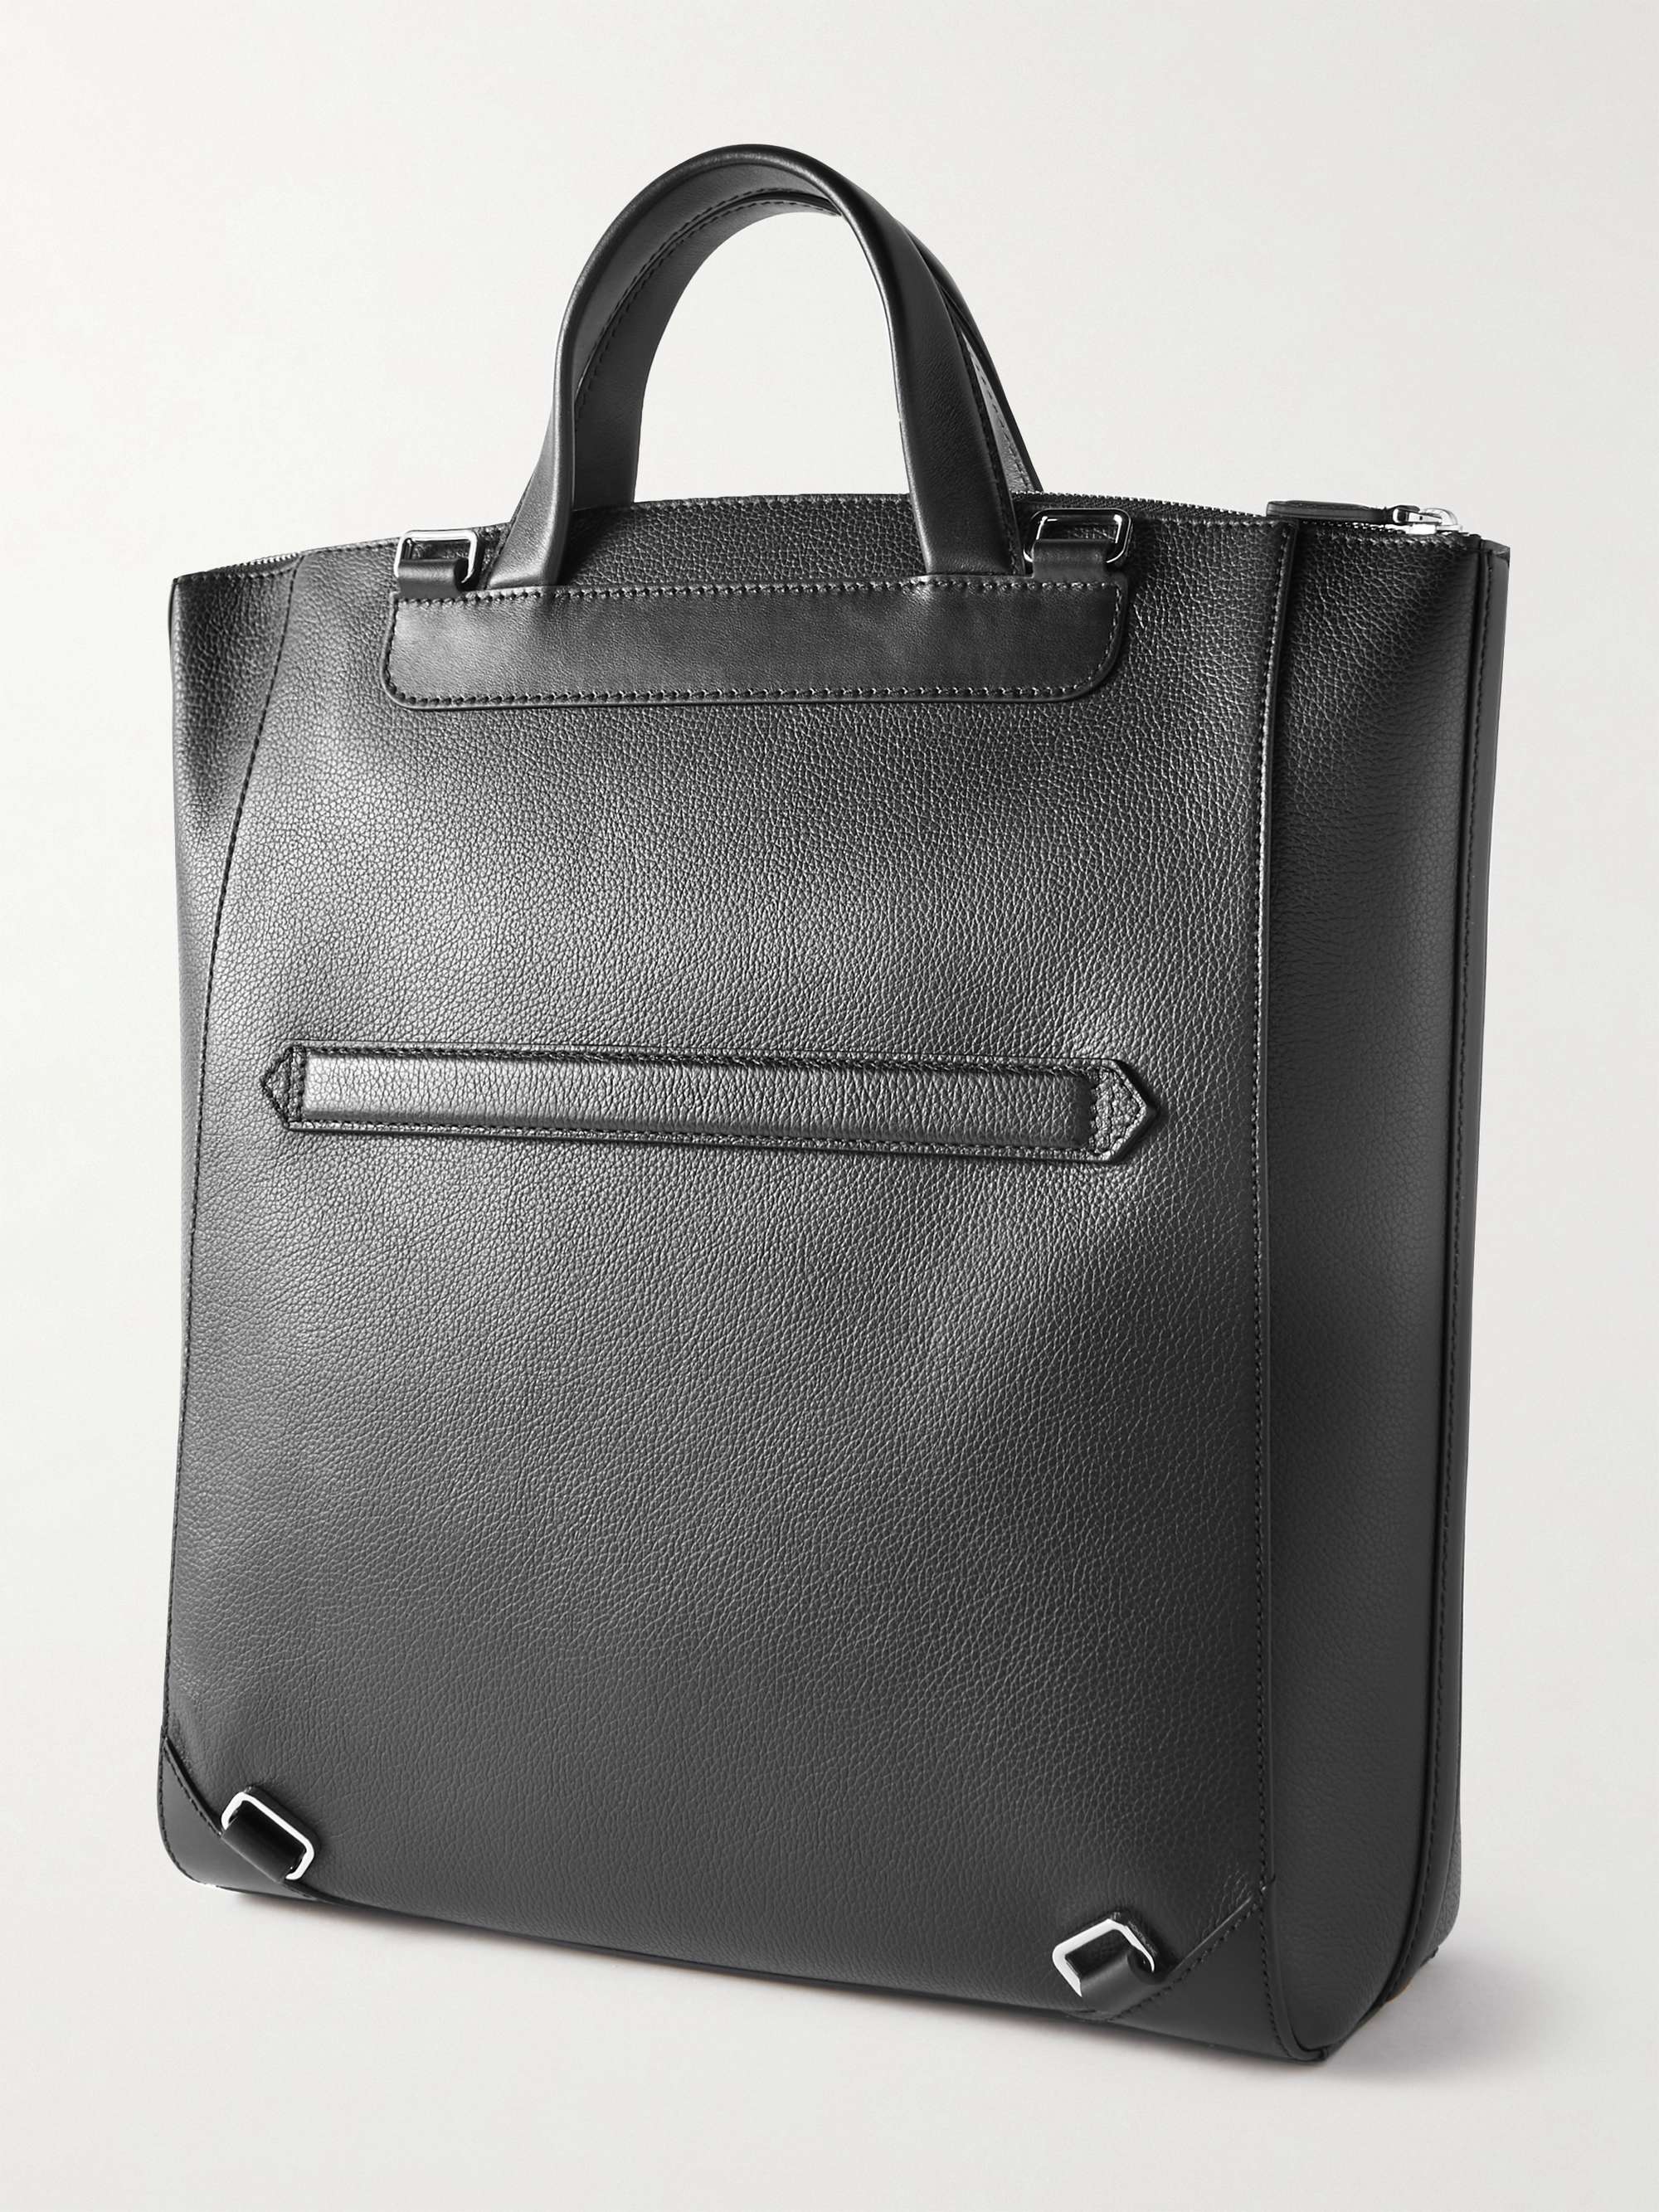 MONTBLANC Meisterstück Full-Grain Leather Tote Bag